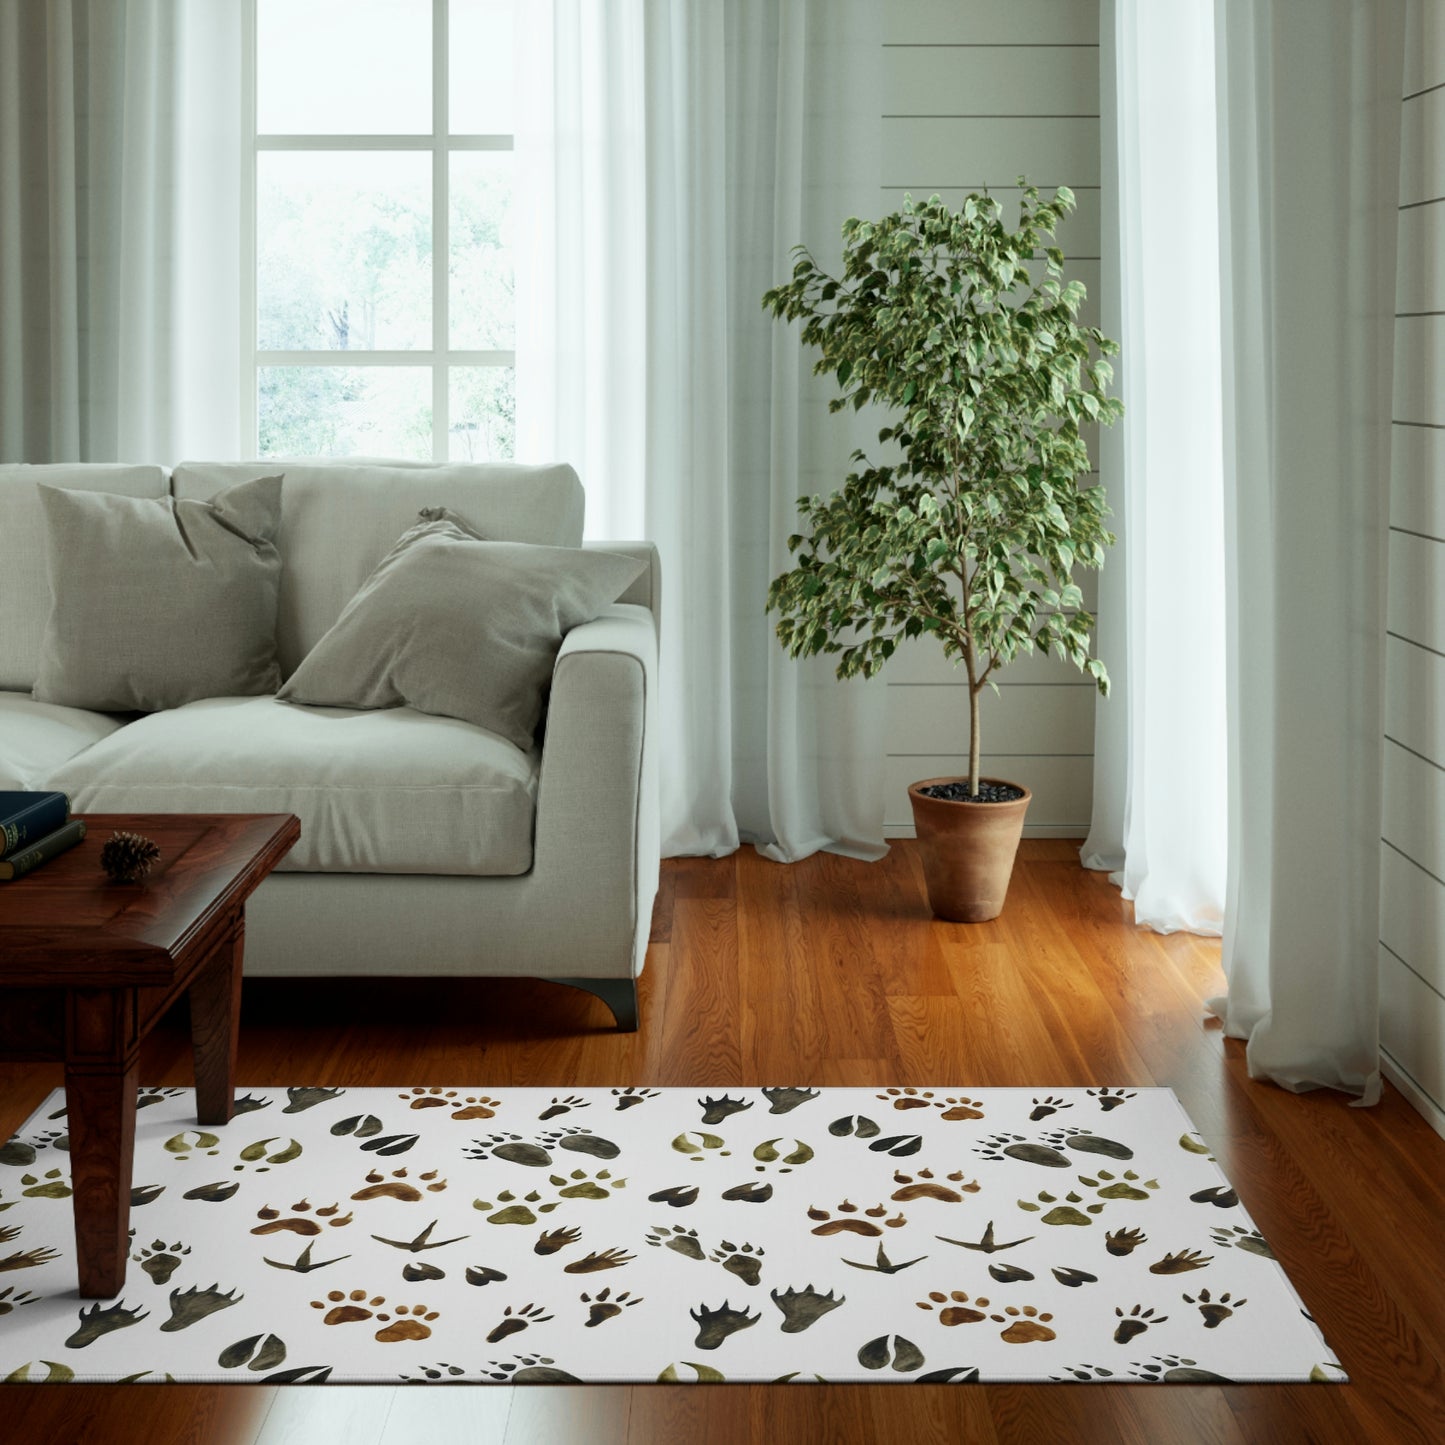 Animal tracks rug, Woodland rug anti-slip backing - Footprints in the forest